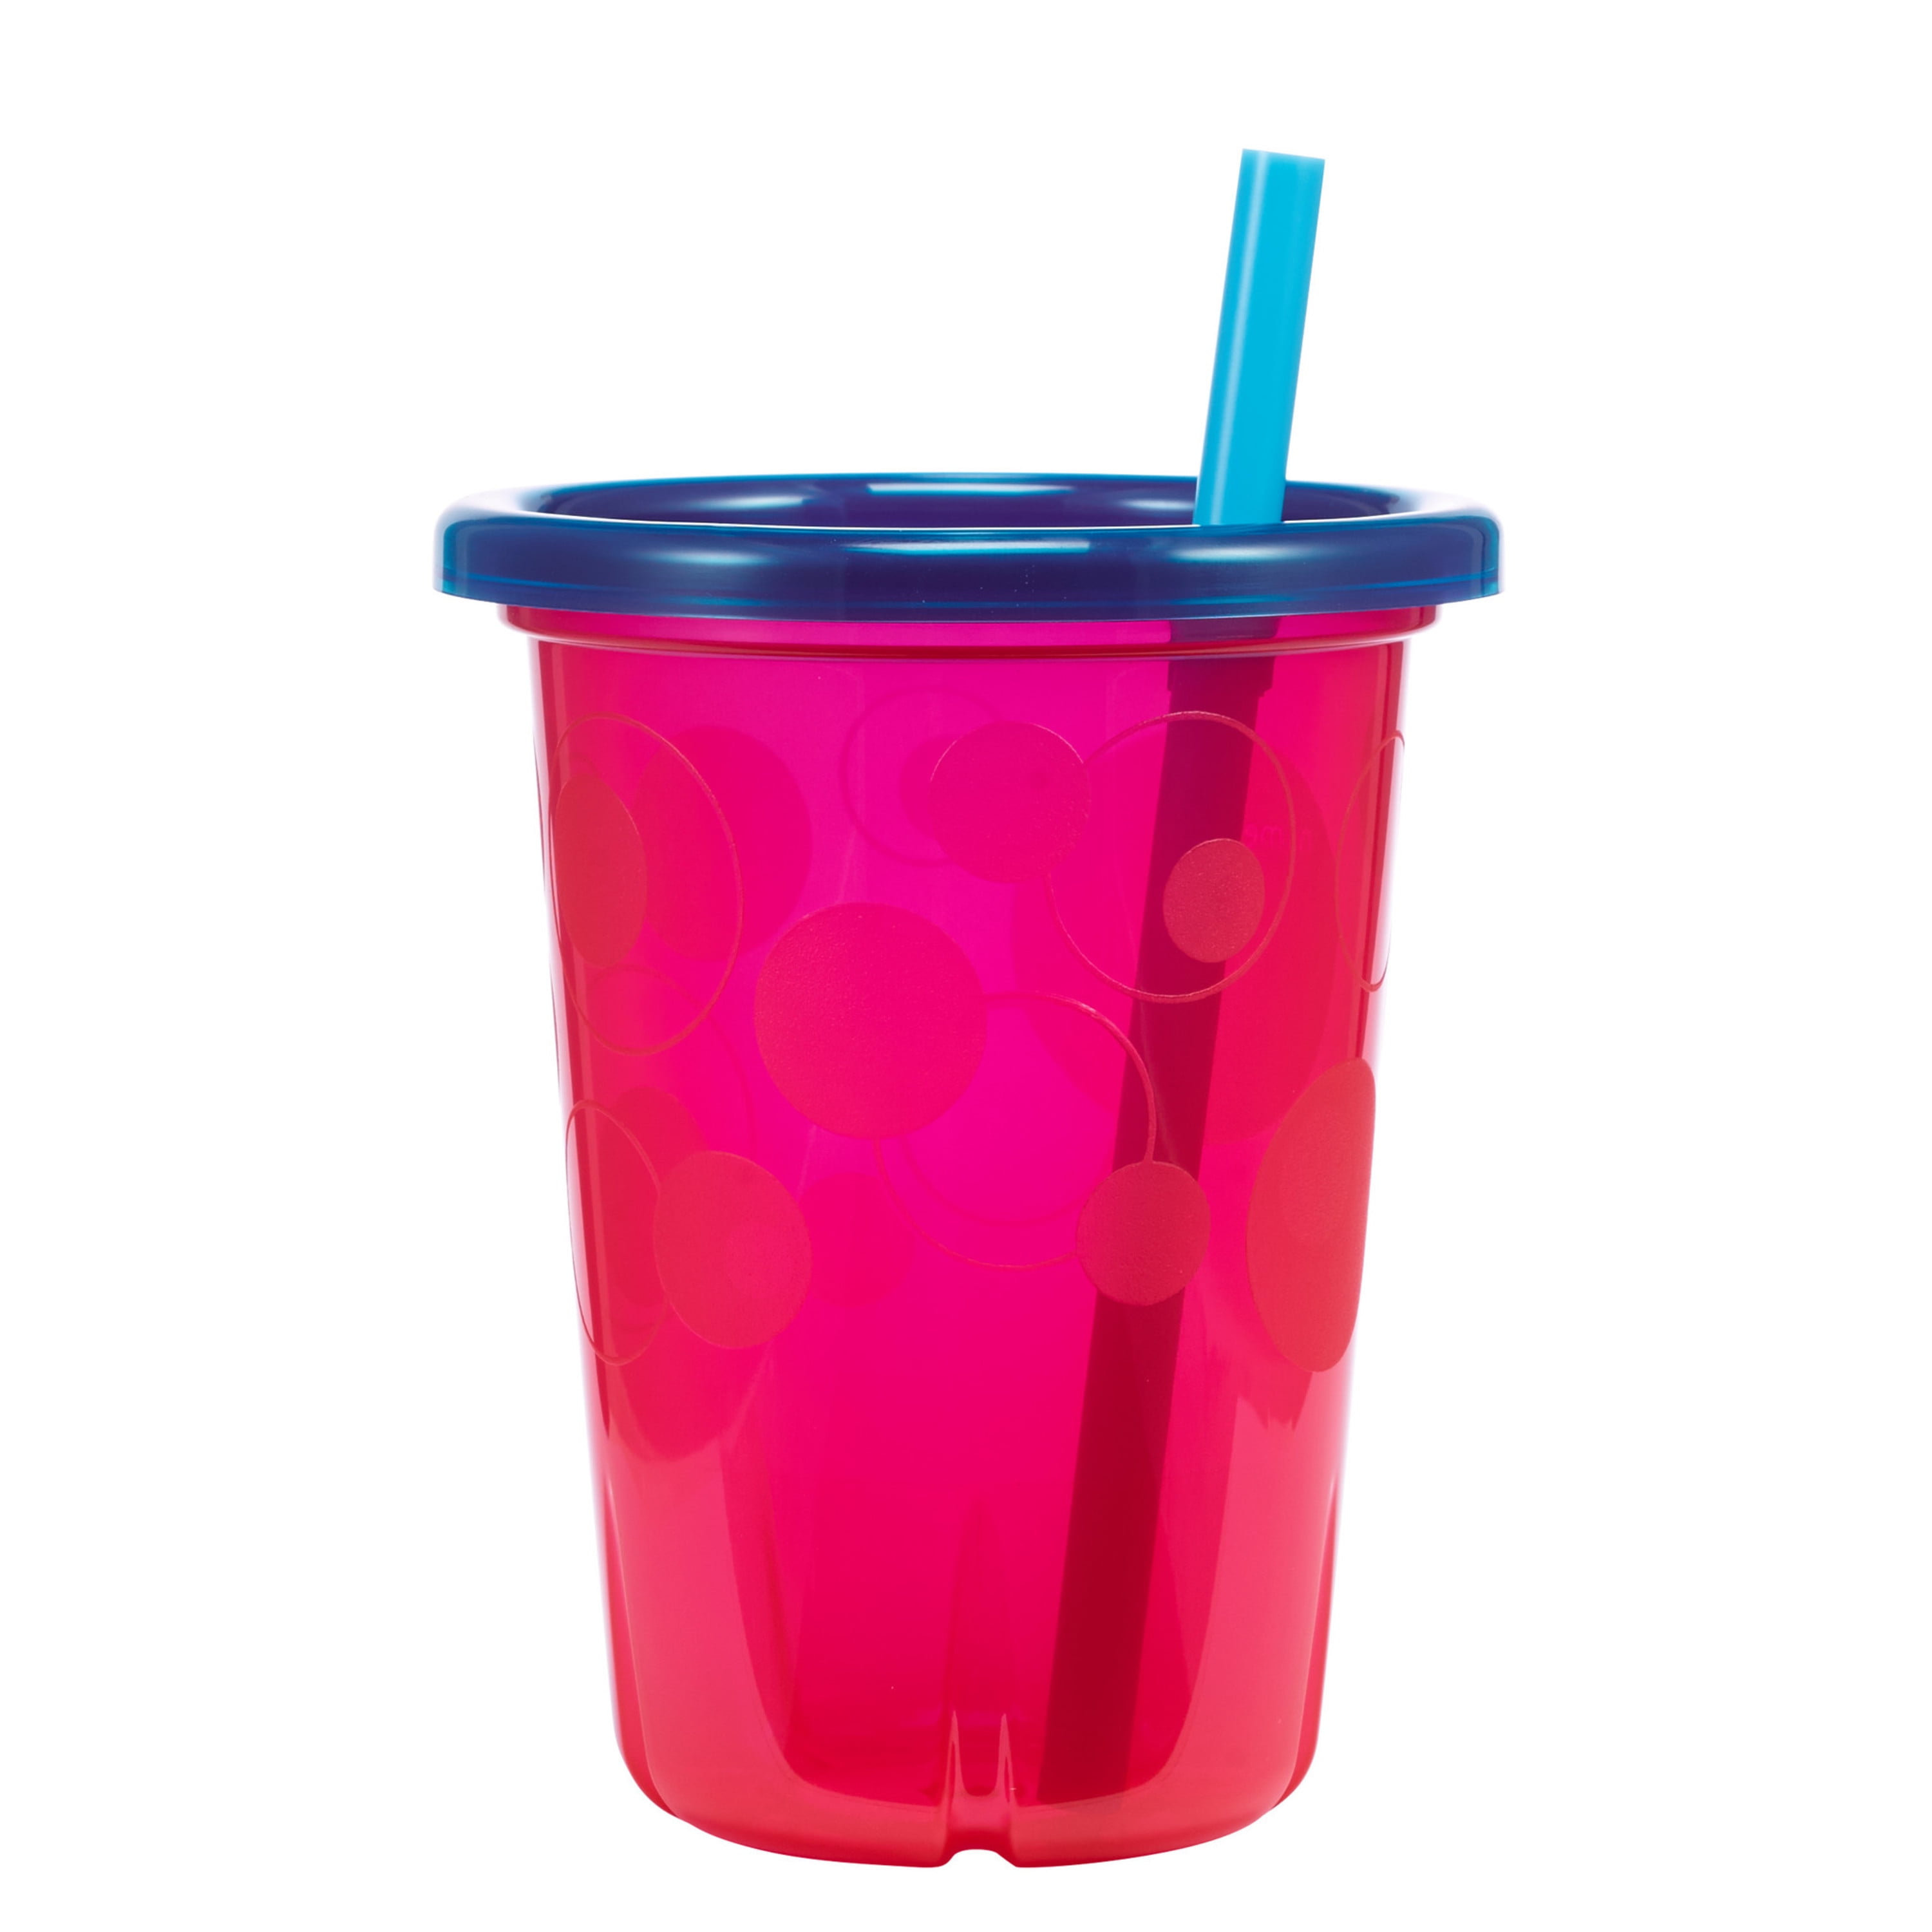 Sammons Preston Small Cup with Built-in Straw, 13 oz. Sippy Cup with Secure Lid and Handle for Spill Prevention, Spillproof Mug with Fun Straw for